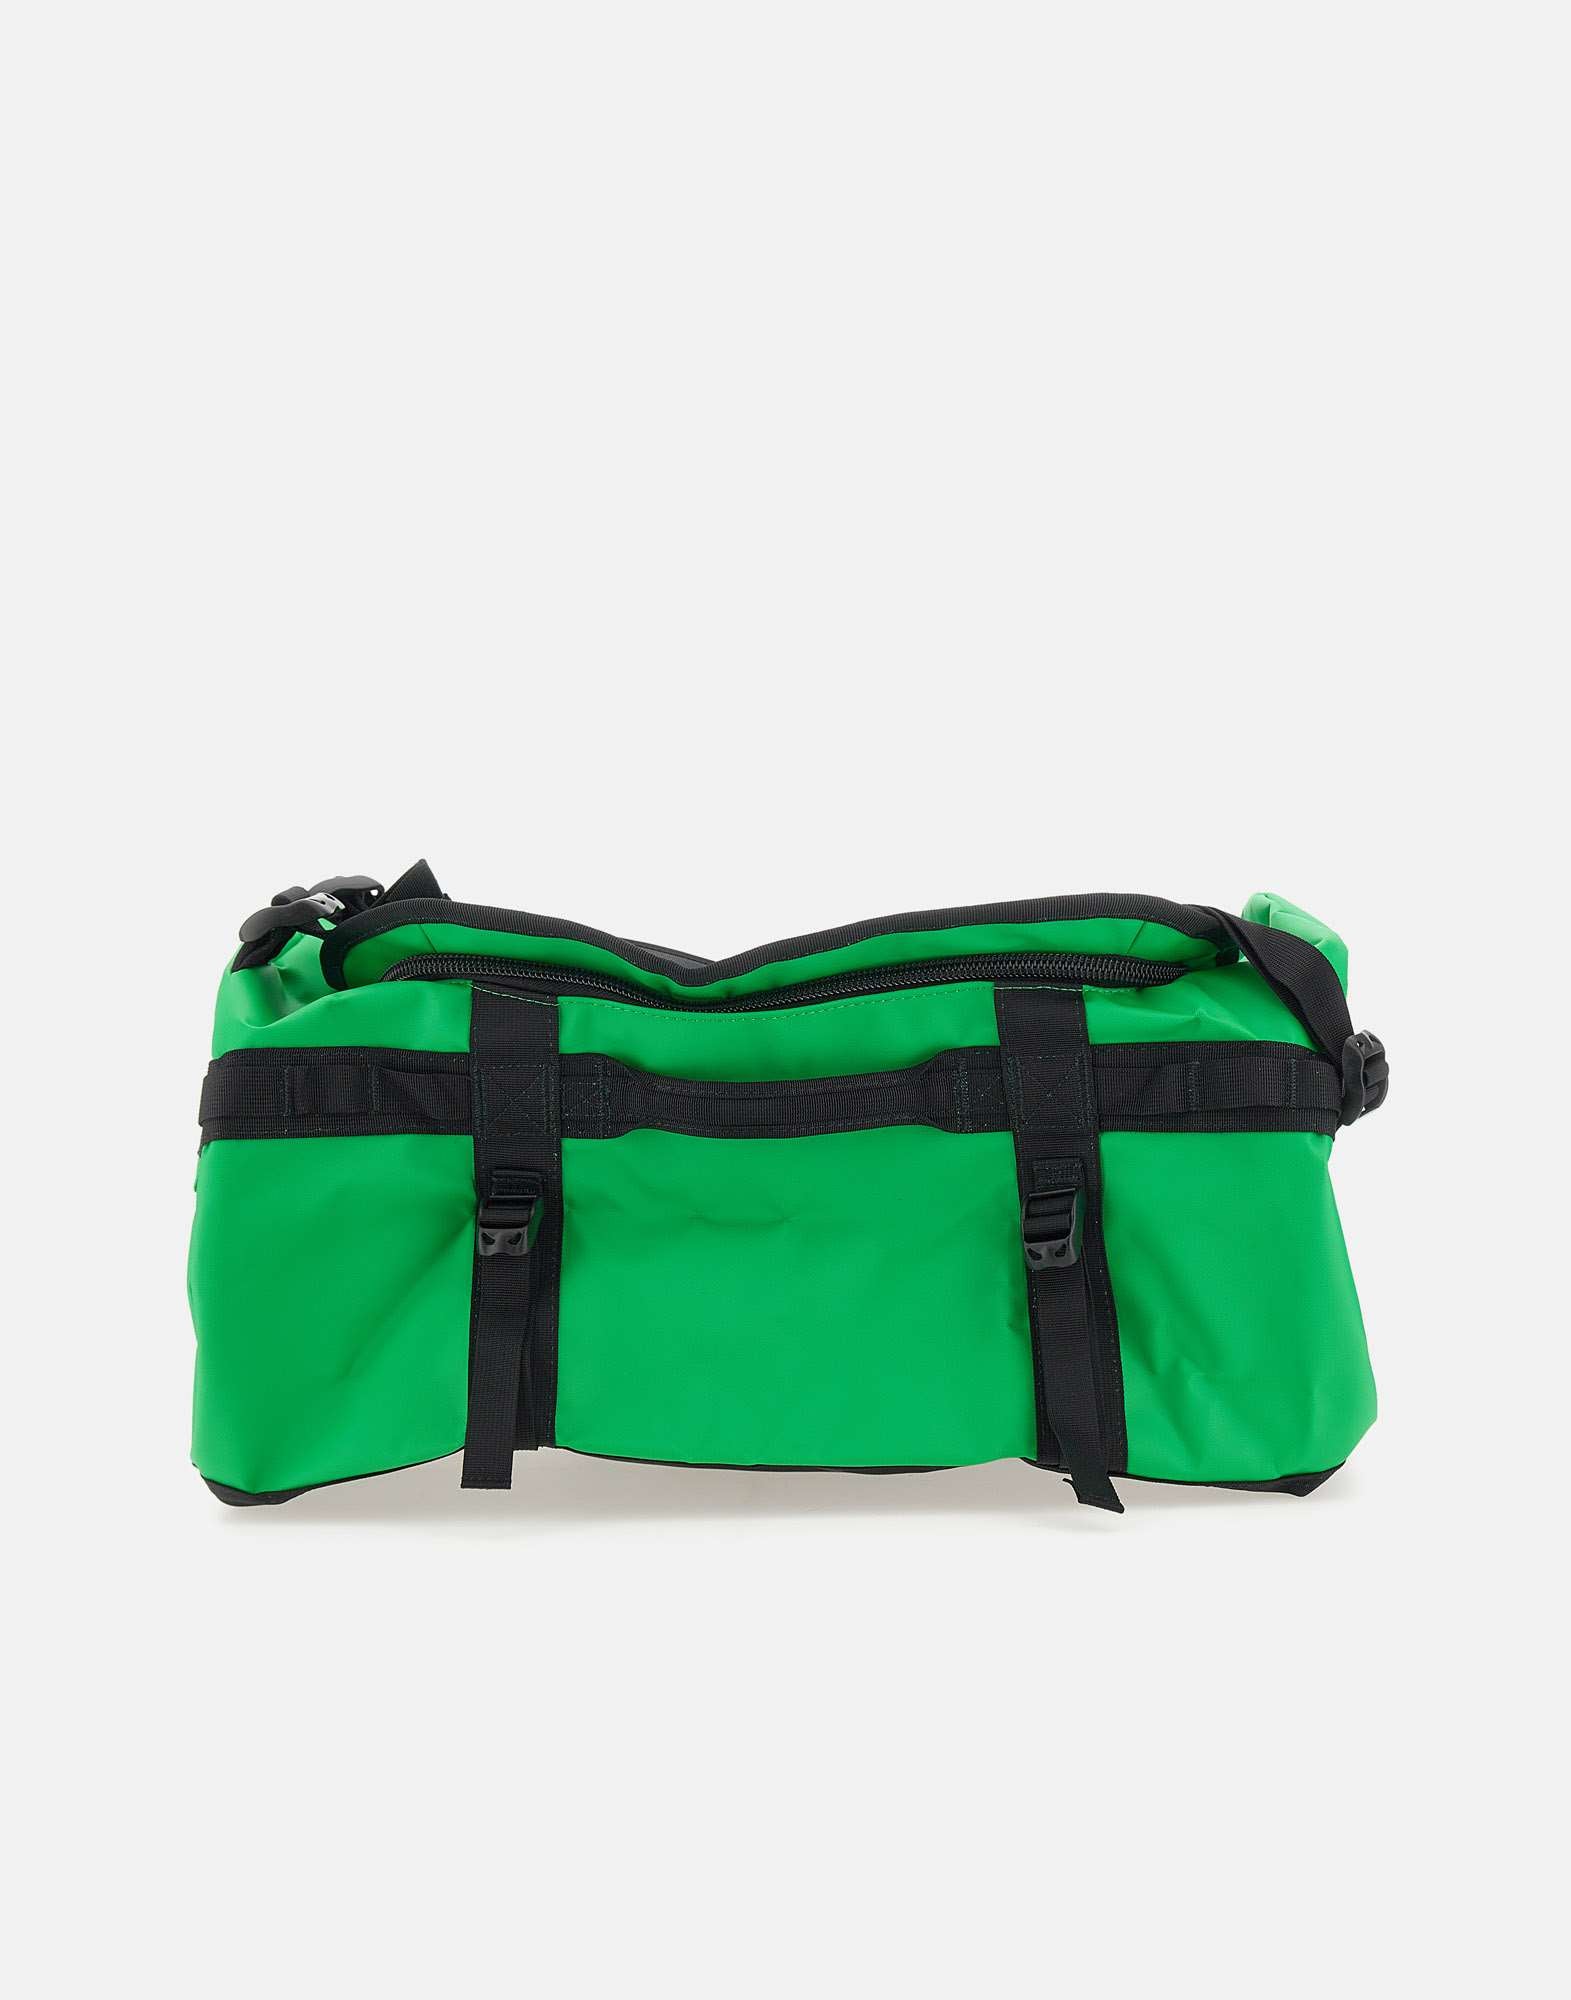 THE NORTH FACE NF0A52ST Man black/green Suitcases - Zuklat